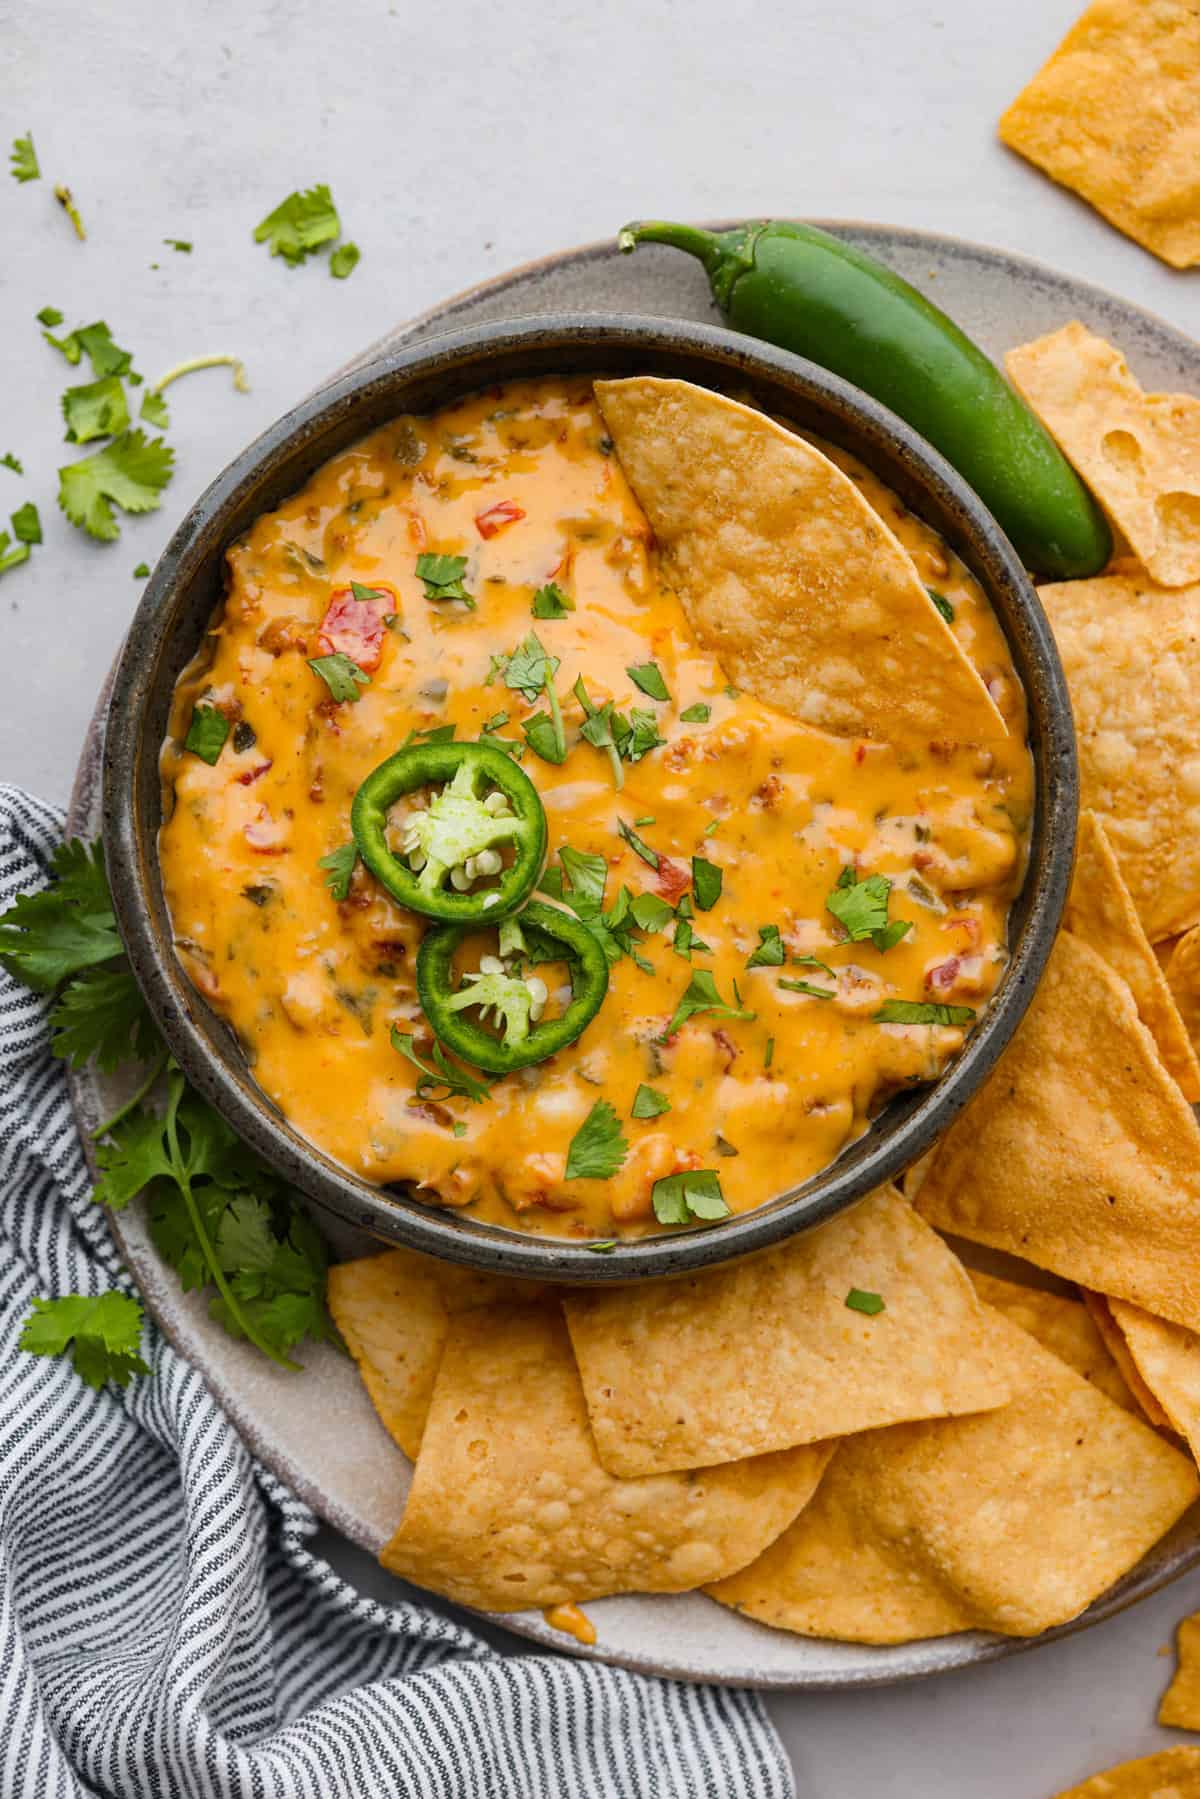 Top view of smoked queso dip in a black bowl on top of a serving platter. Chips and cilantro surround the bowl with a chip resting in the dip.